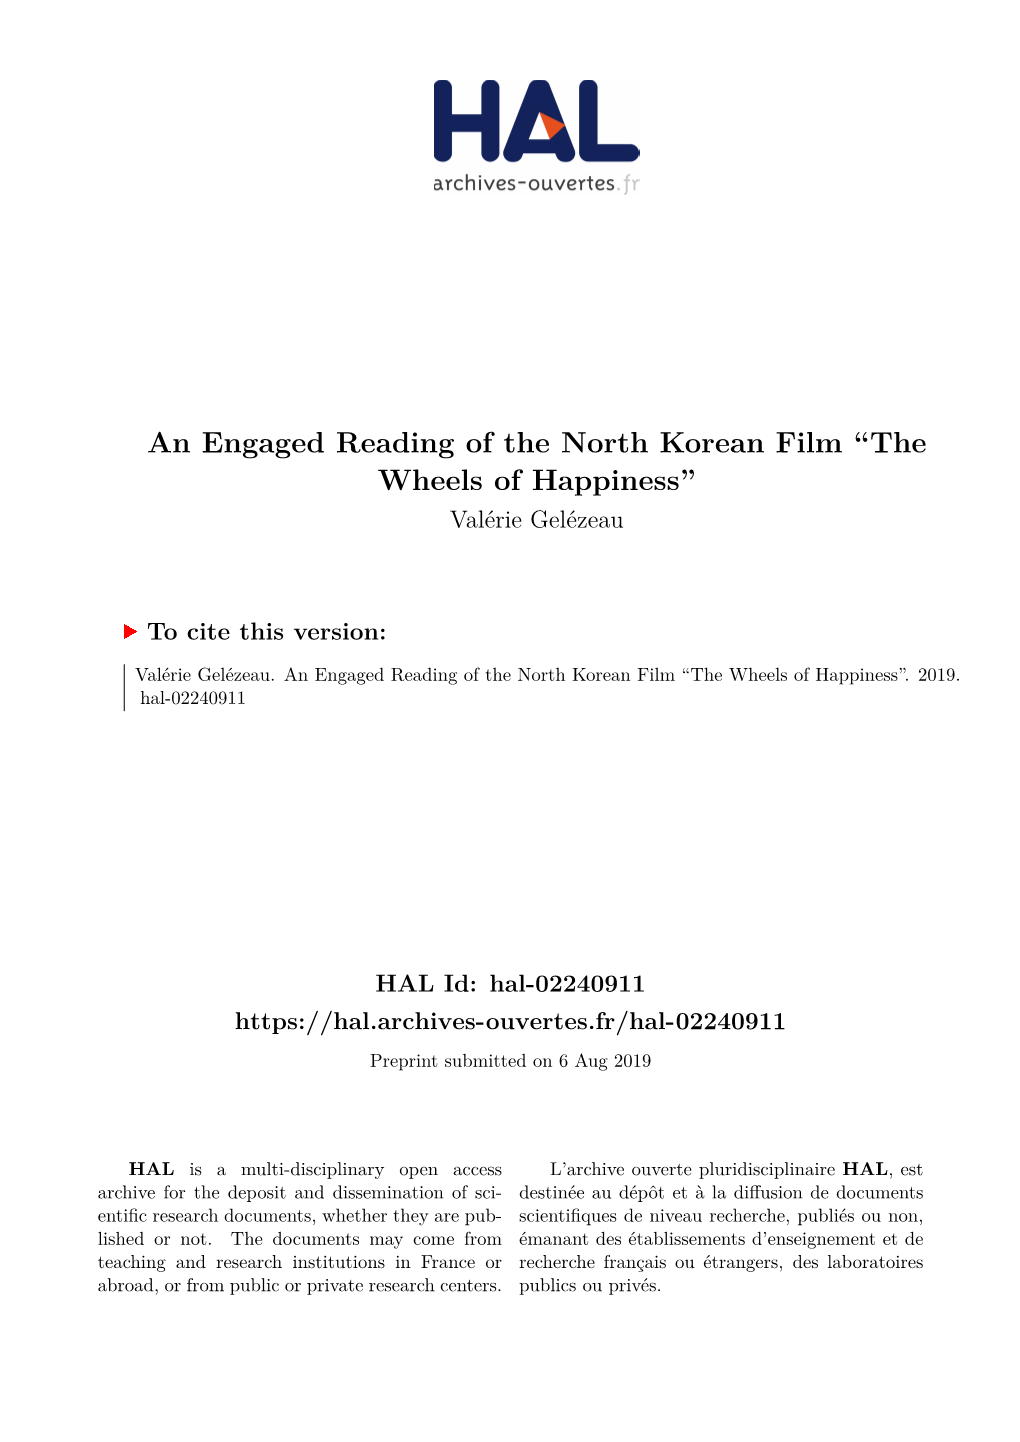 An Engaged Reading of the North Korean Film ``The Wheels of Happiness